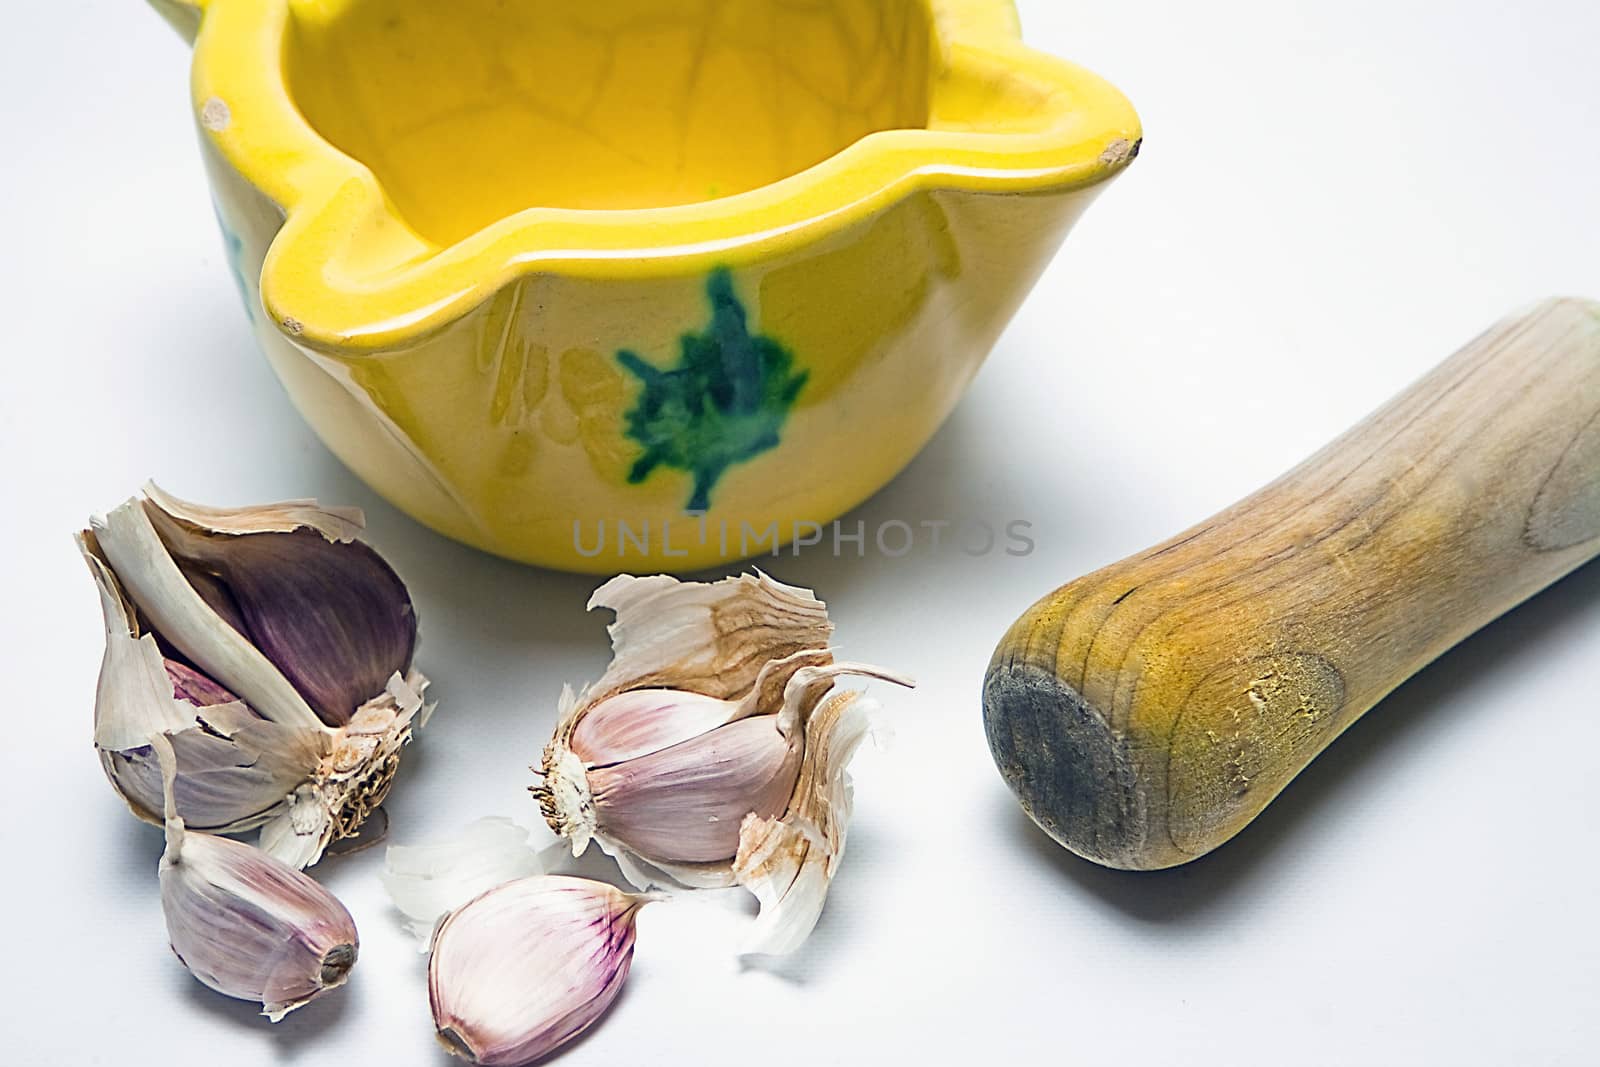   Ceramic mortar and garlic, used in the Spanish traditional kitchen, Spain